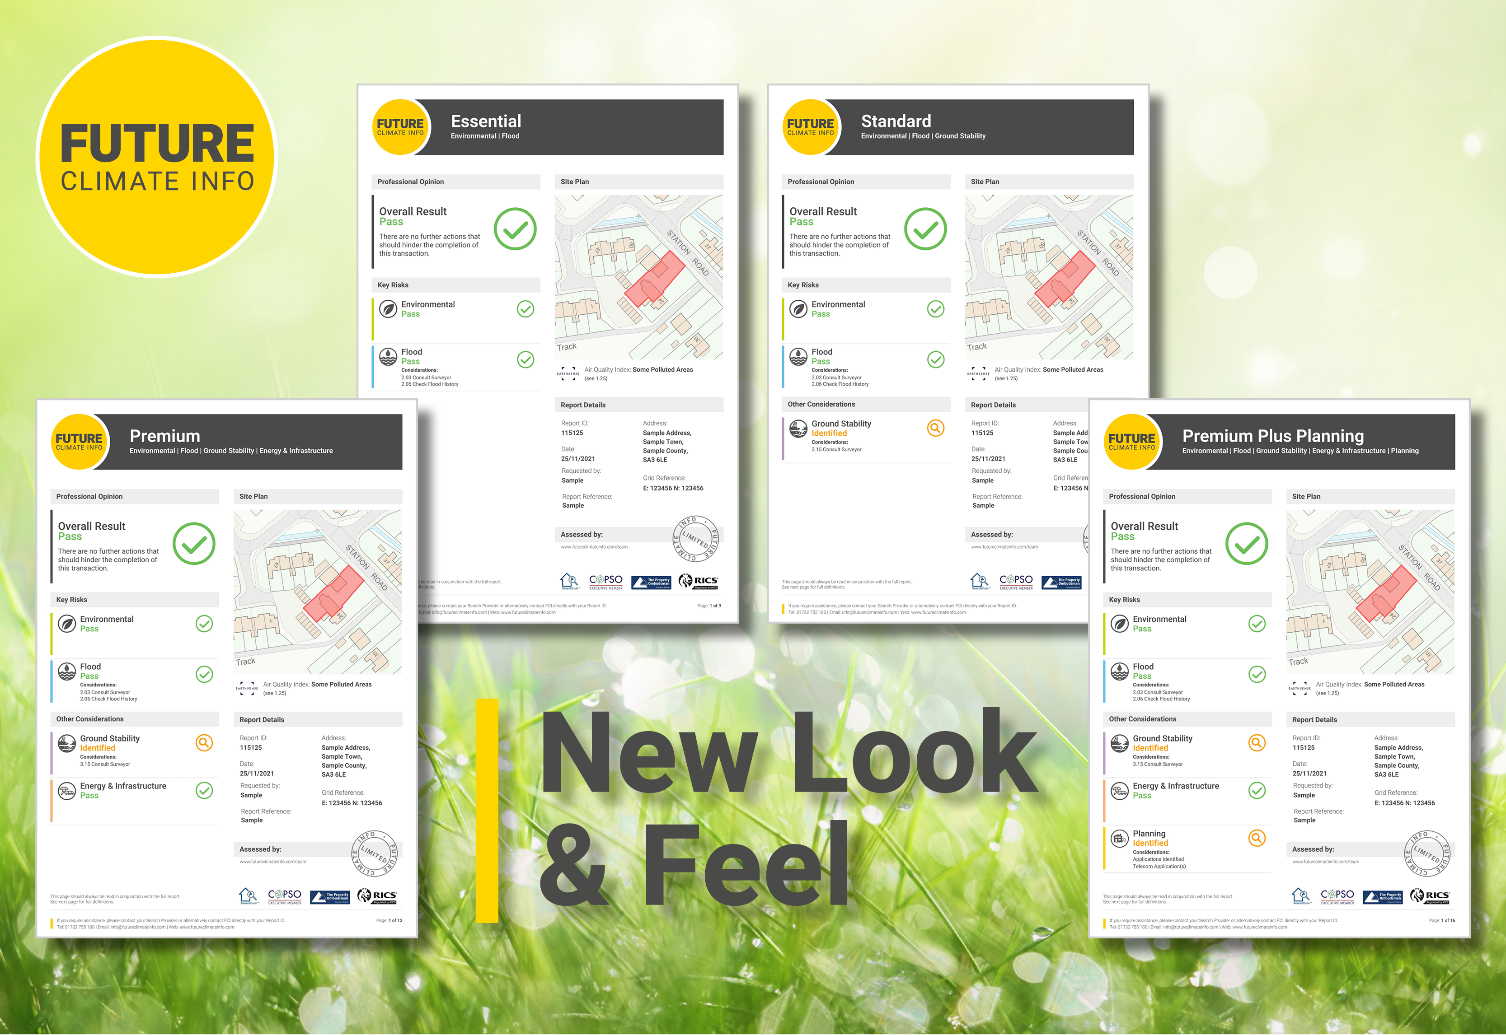 FCI launches its new-look residential environmental reports